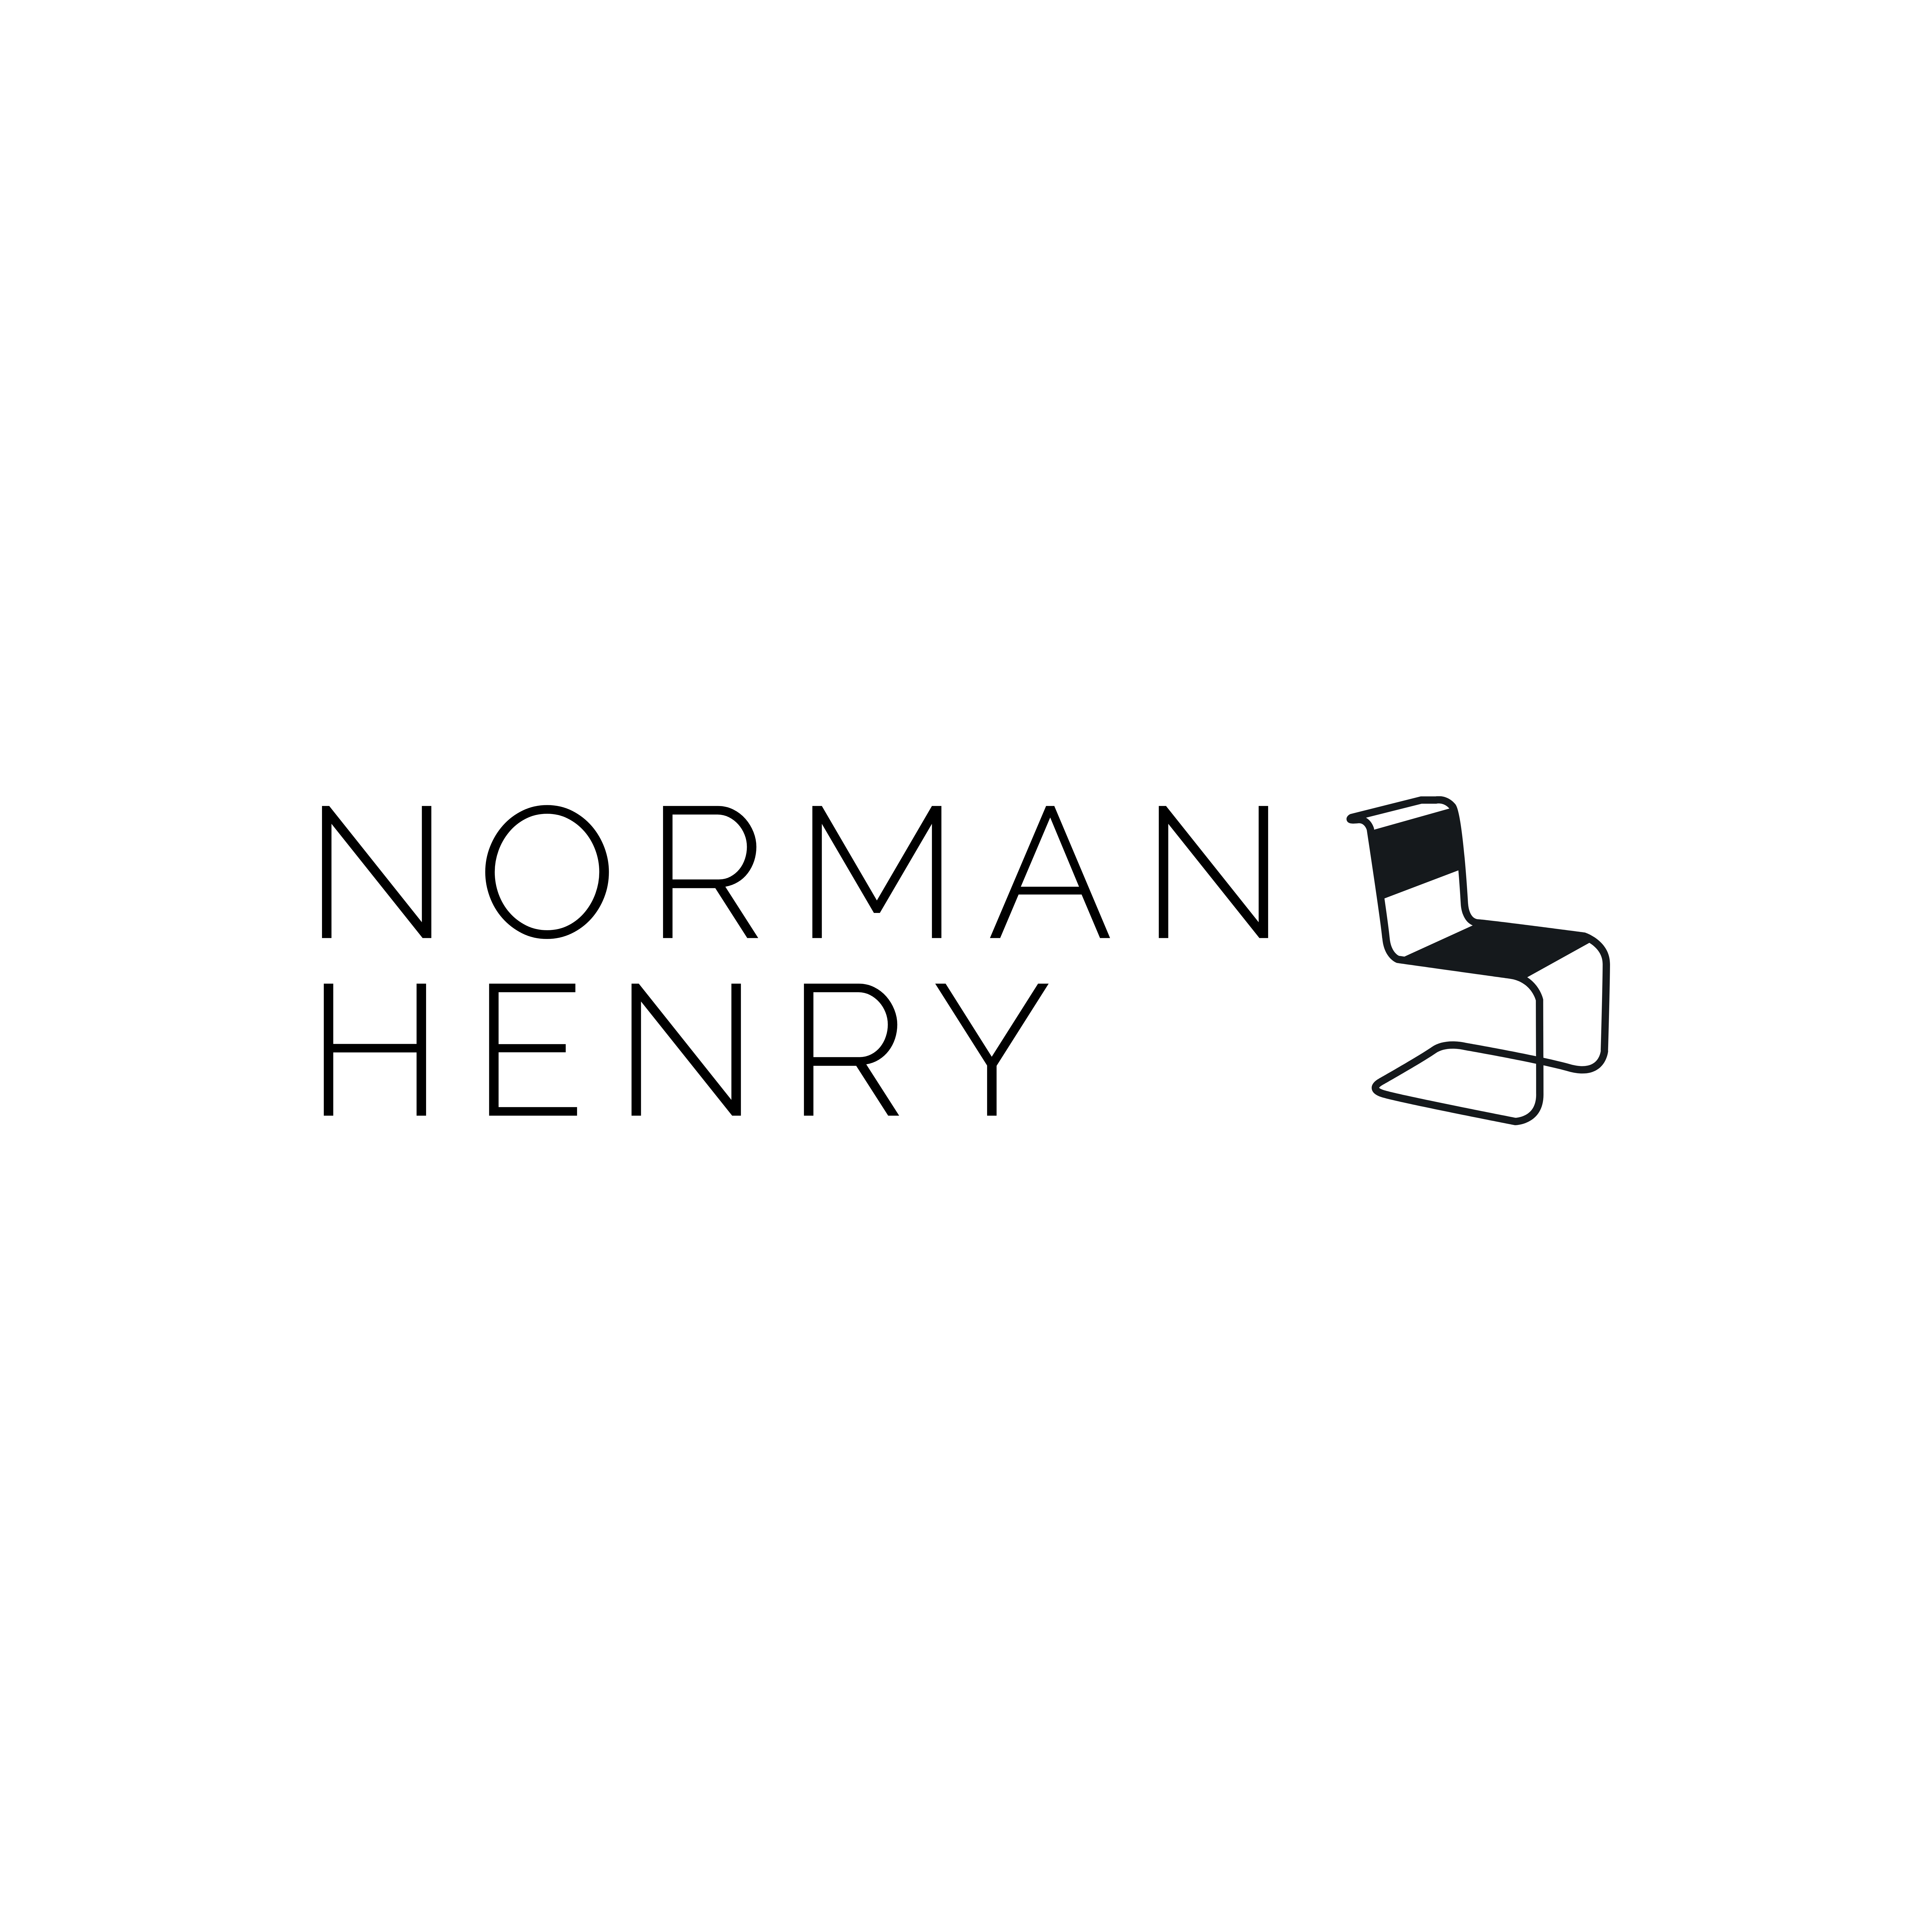 NORMAN HENRY